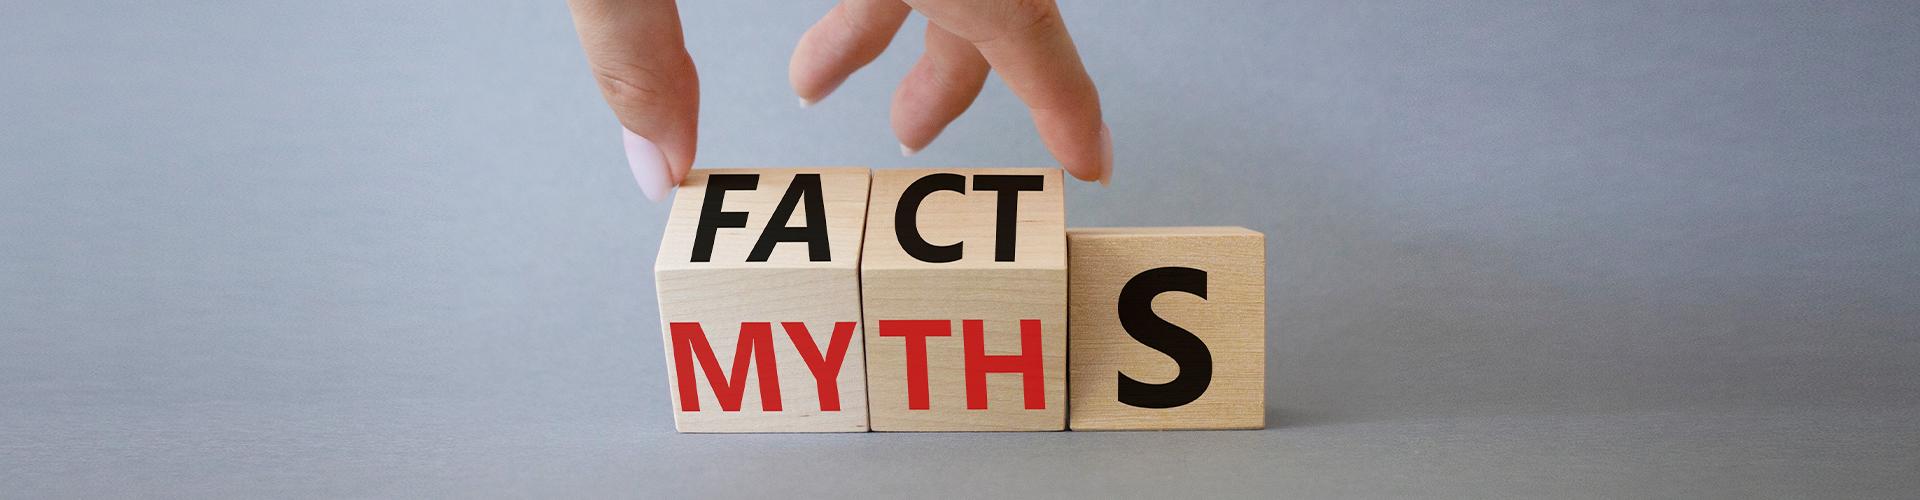 Wooden cubes with facts and myths written on them 